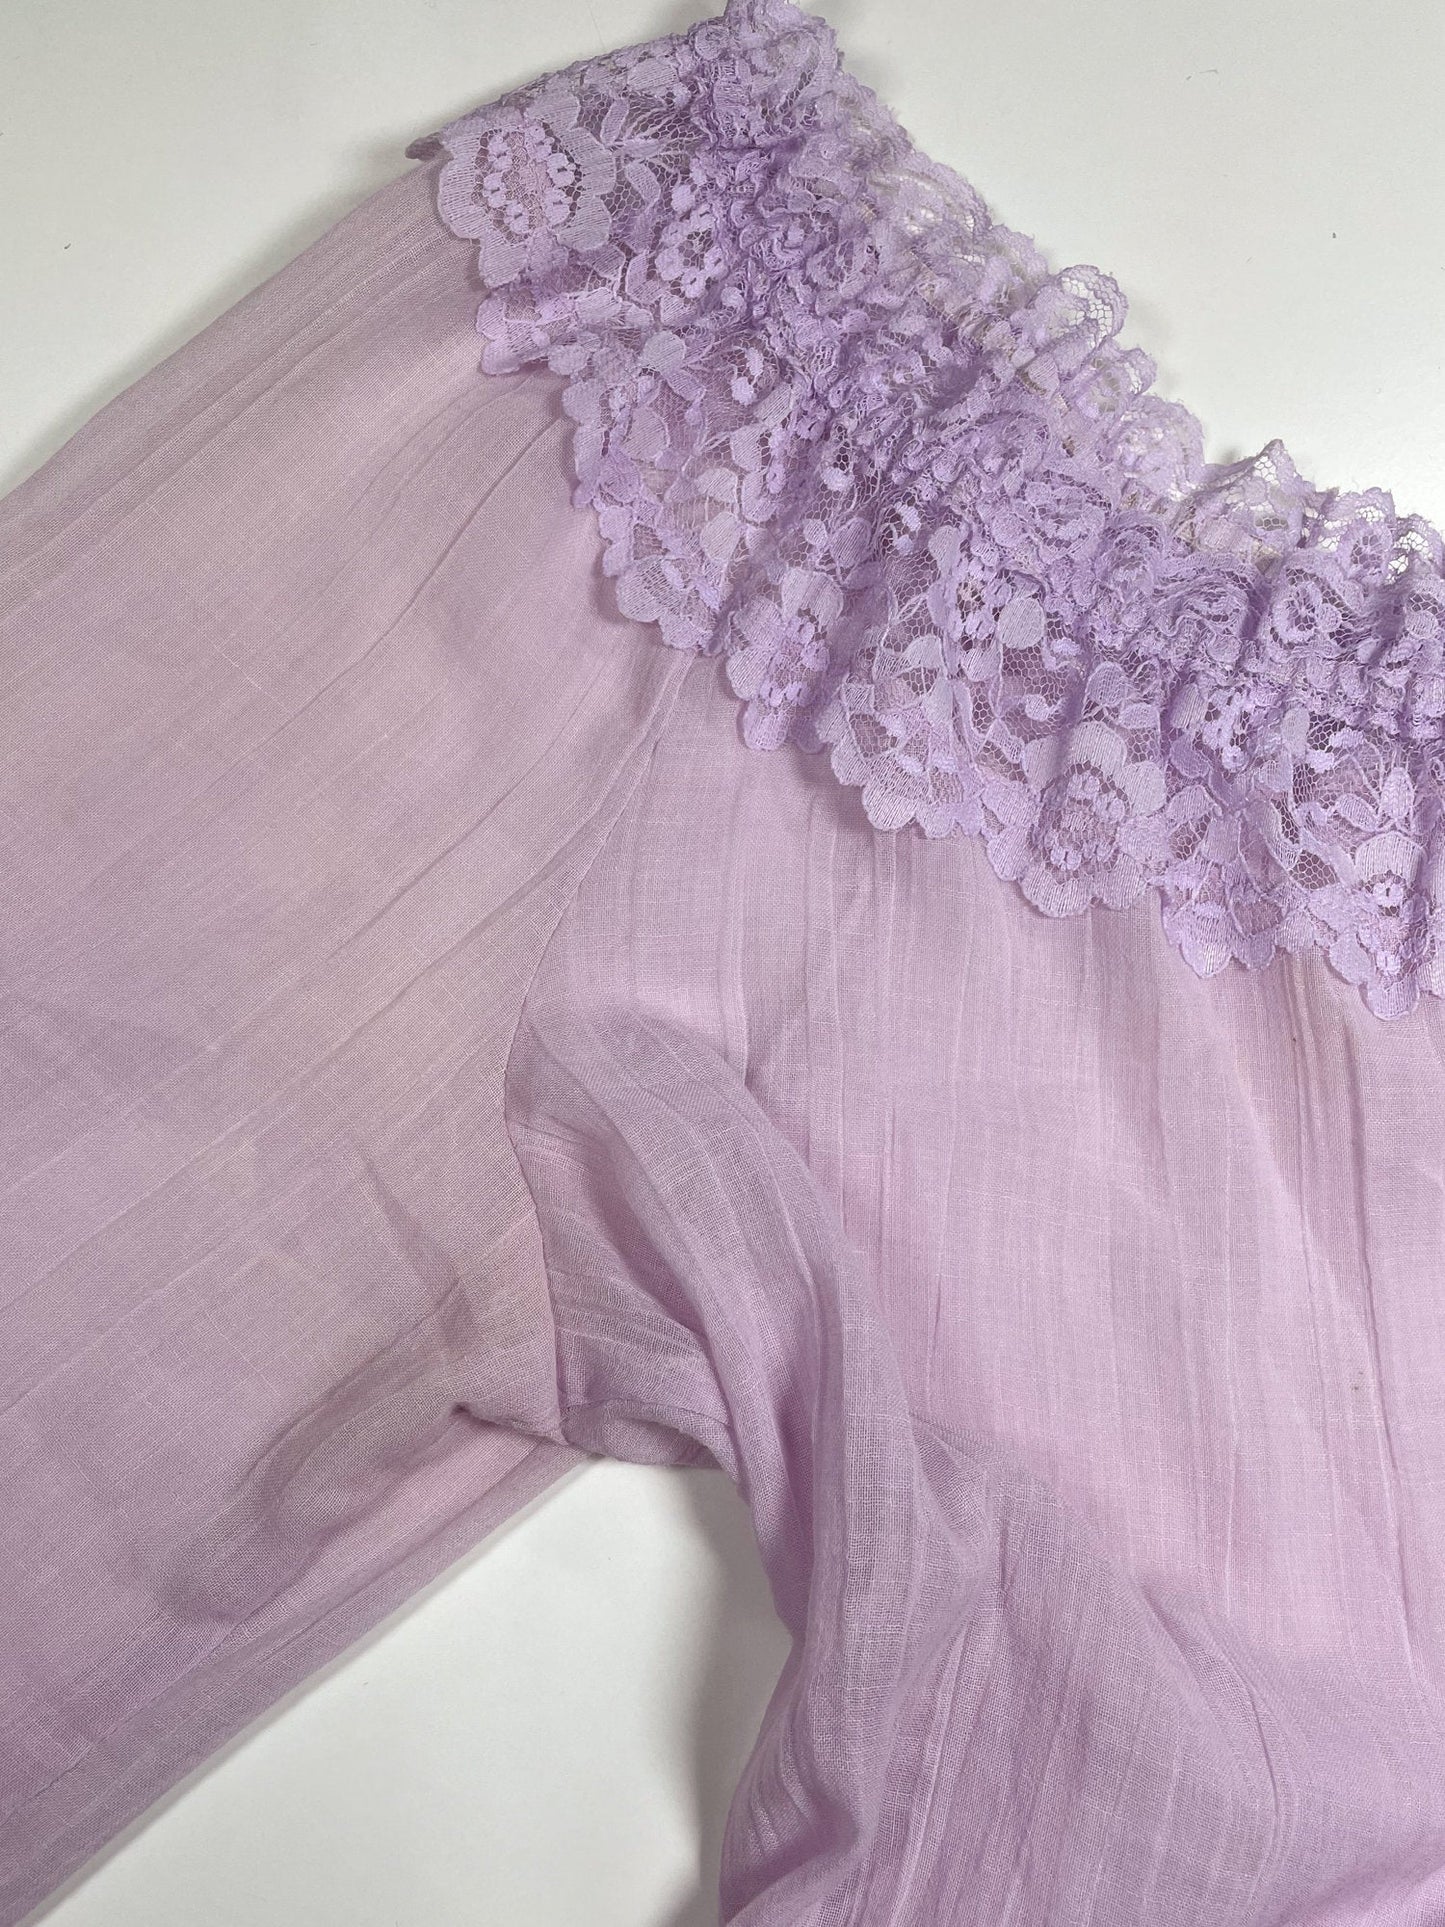 70s Boho Lilac Gauzy Blouse - Small to Large | Vintage Sheer Lace Trim Off-Shoulder Crop Top